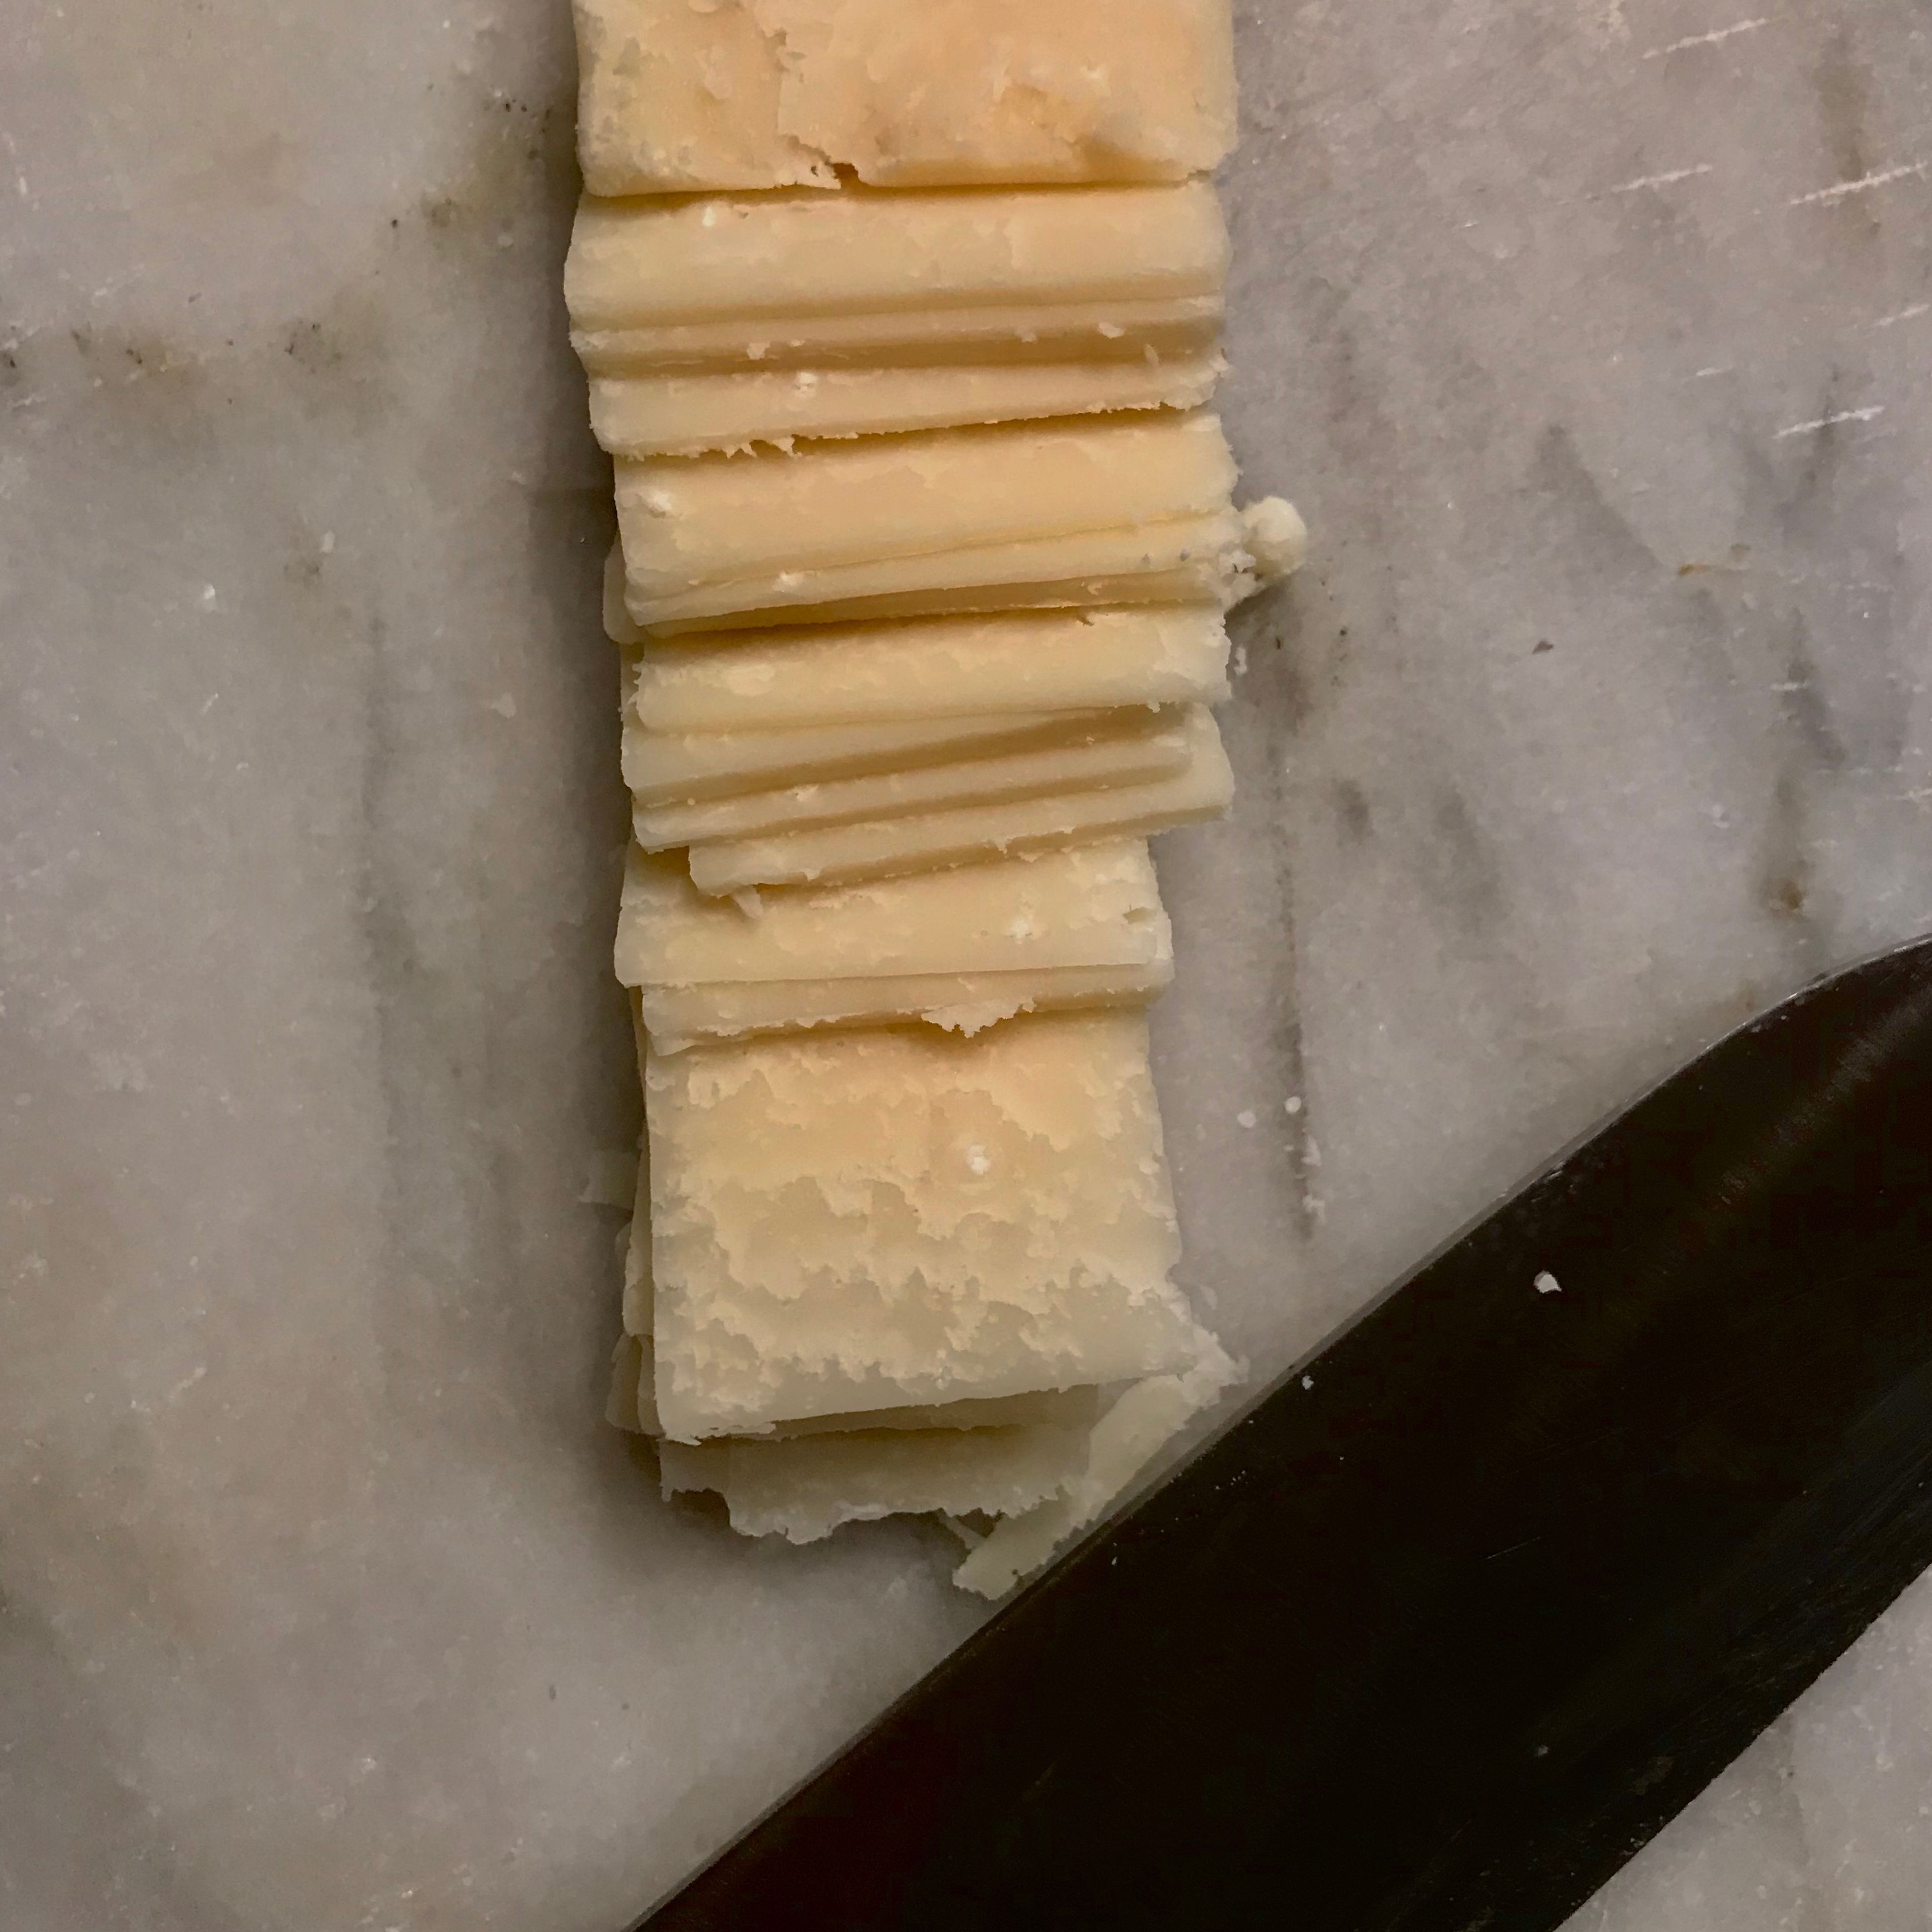 Cut the Parmesan into thin slices. 